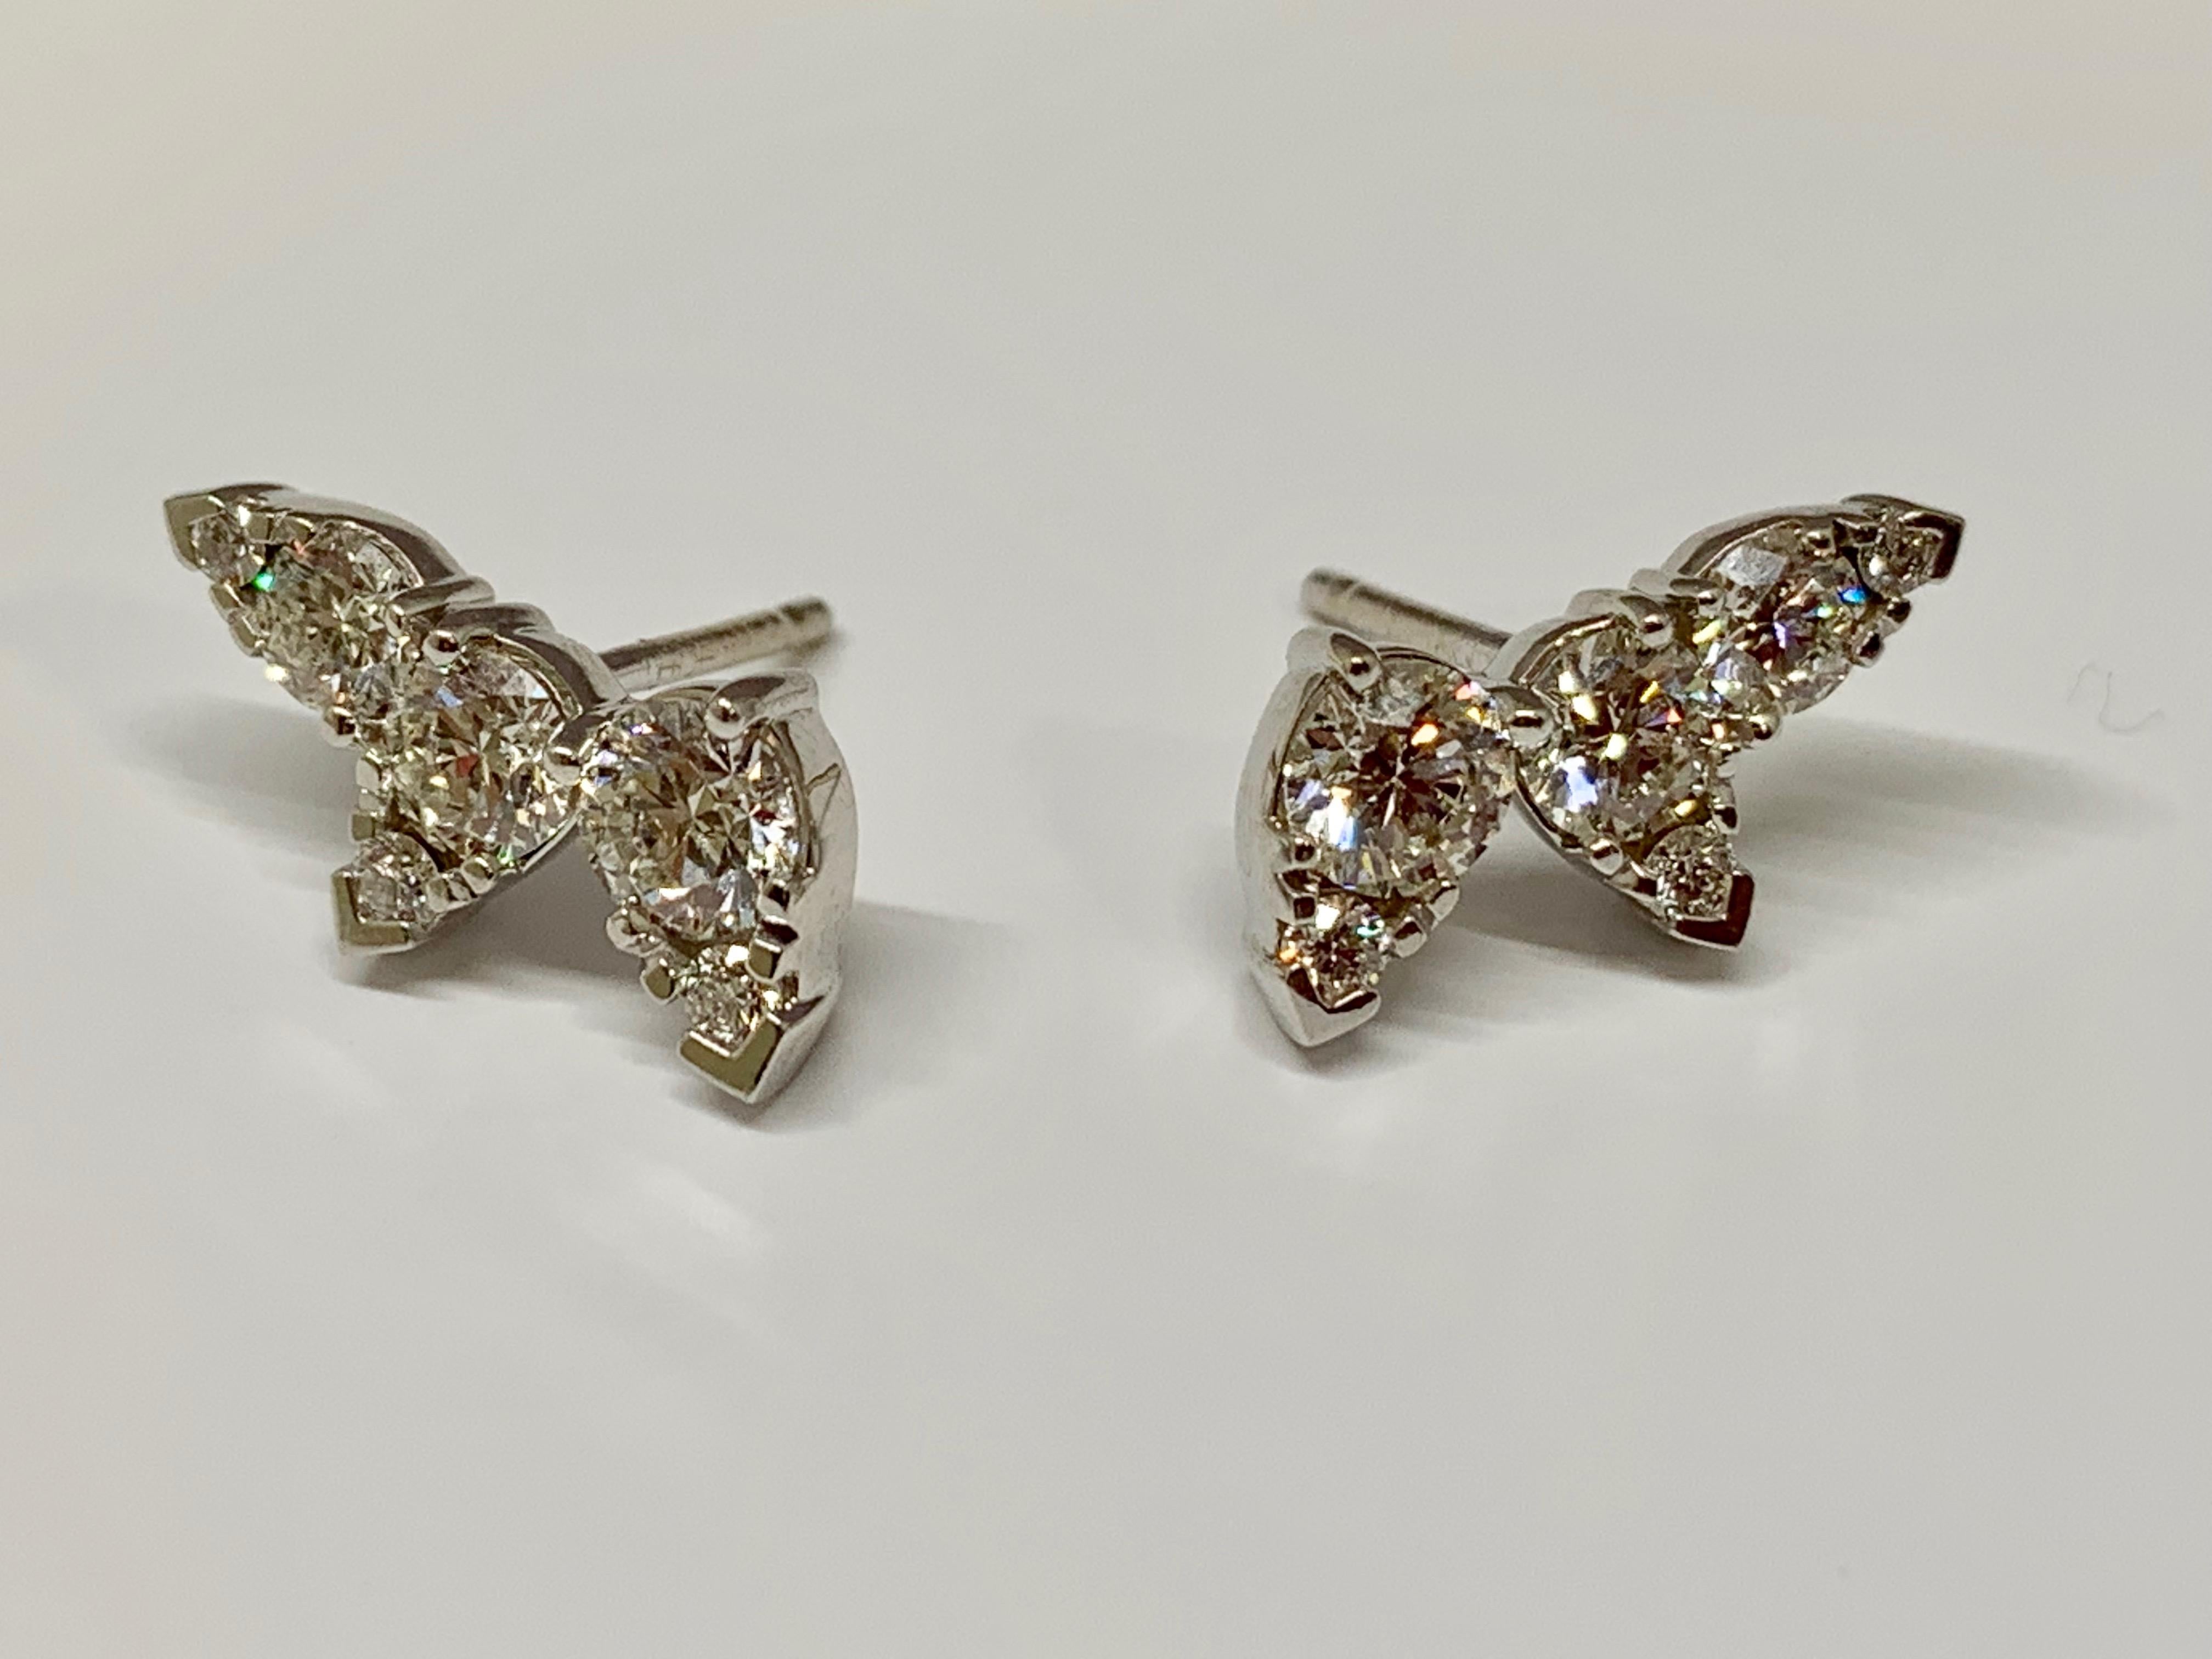 These stunning 18k white gold Hearts On Fire ear climbers are magnificent. The vine-like design holds a total of 1.49 carats of perfectly cut round diamonds. These earrings include heavy-duty tension backs for ultimate security during wear. These